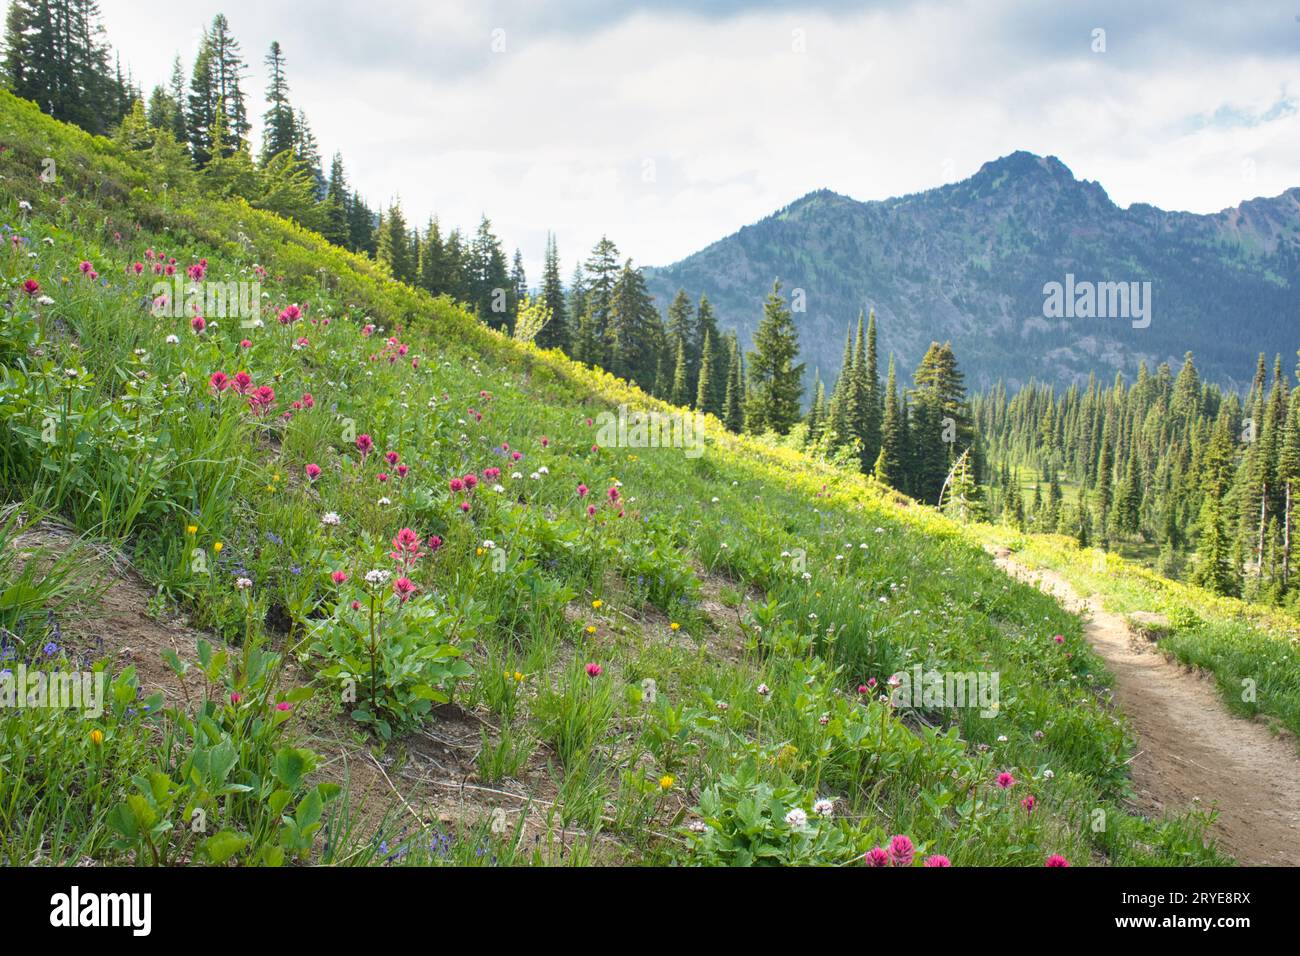 Hiking trail in Washington state at Mount Rainier National Park with mountains, evergreens, and colorful wildflowers. Stock Photo